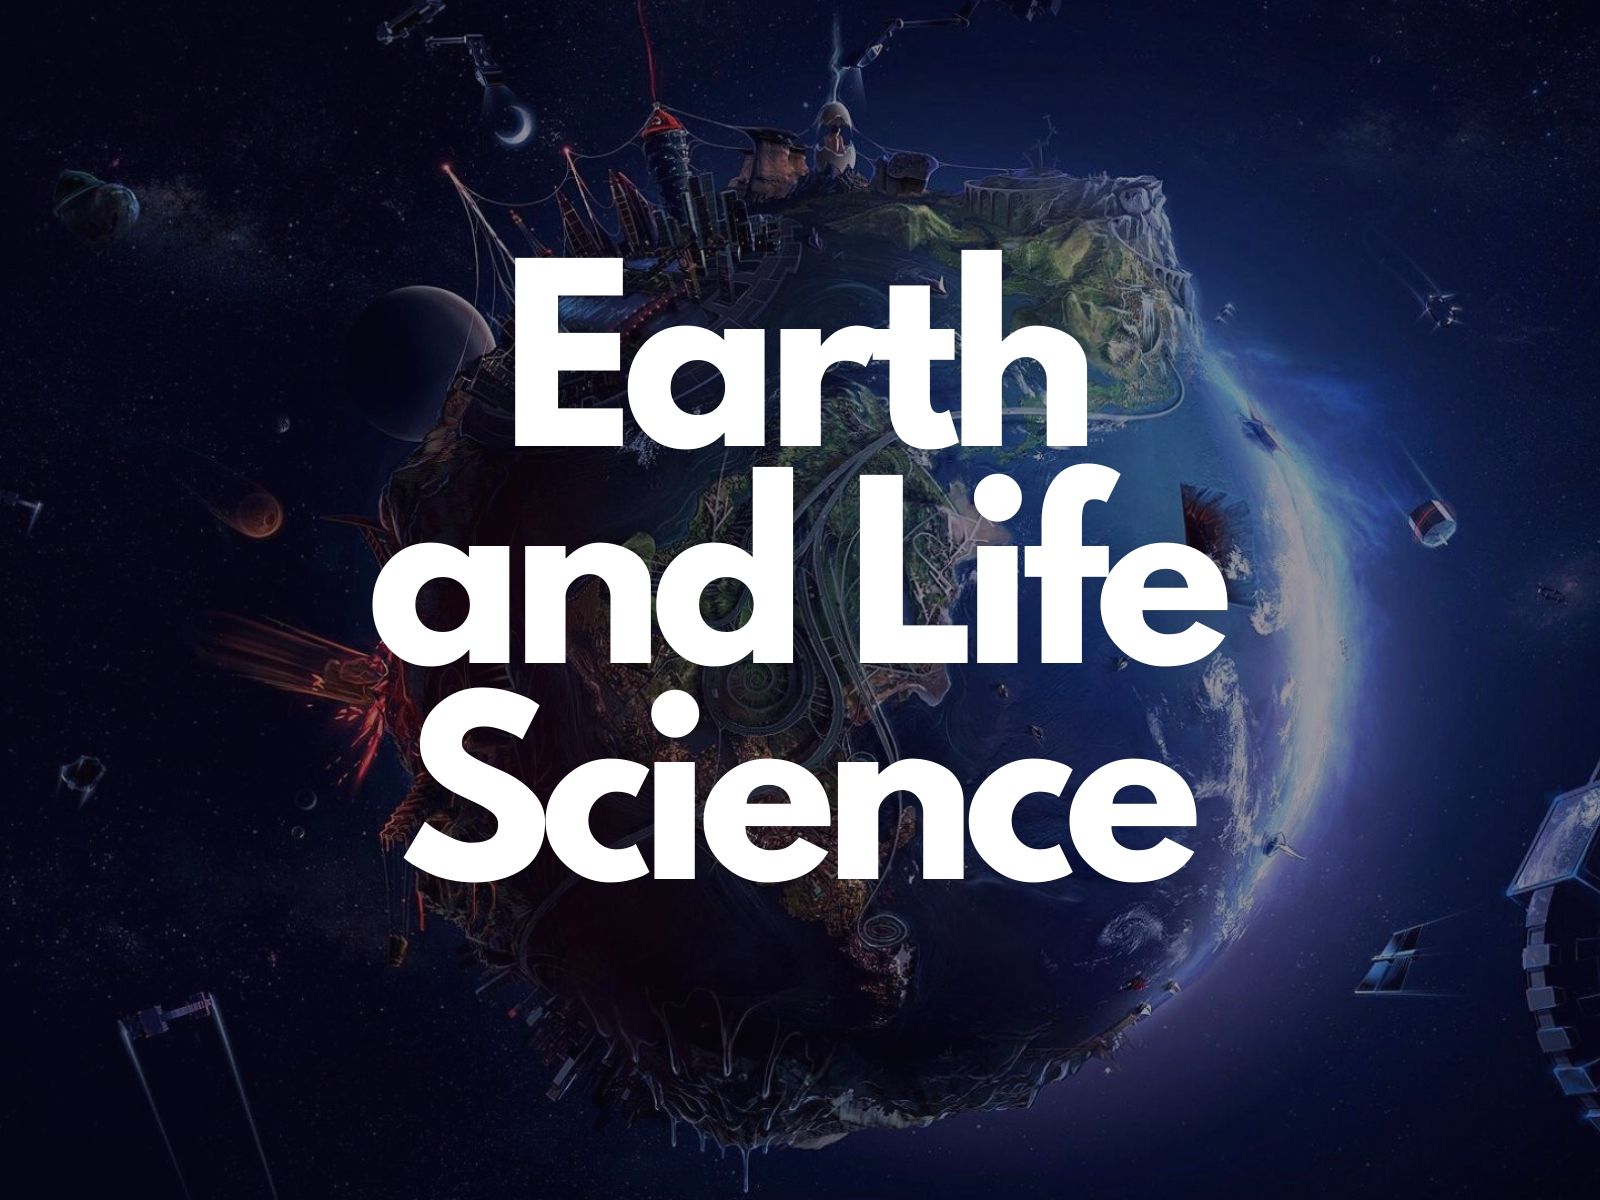 essay about earth and life science